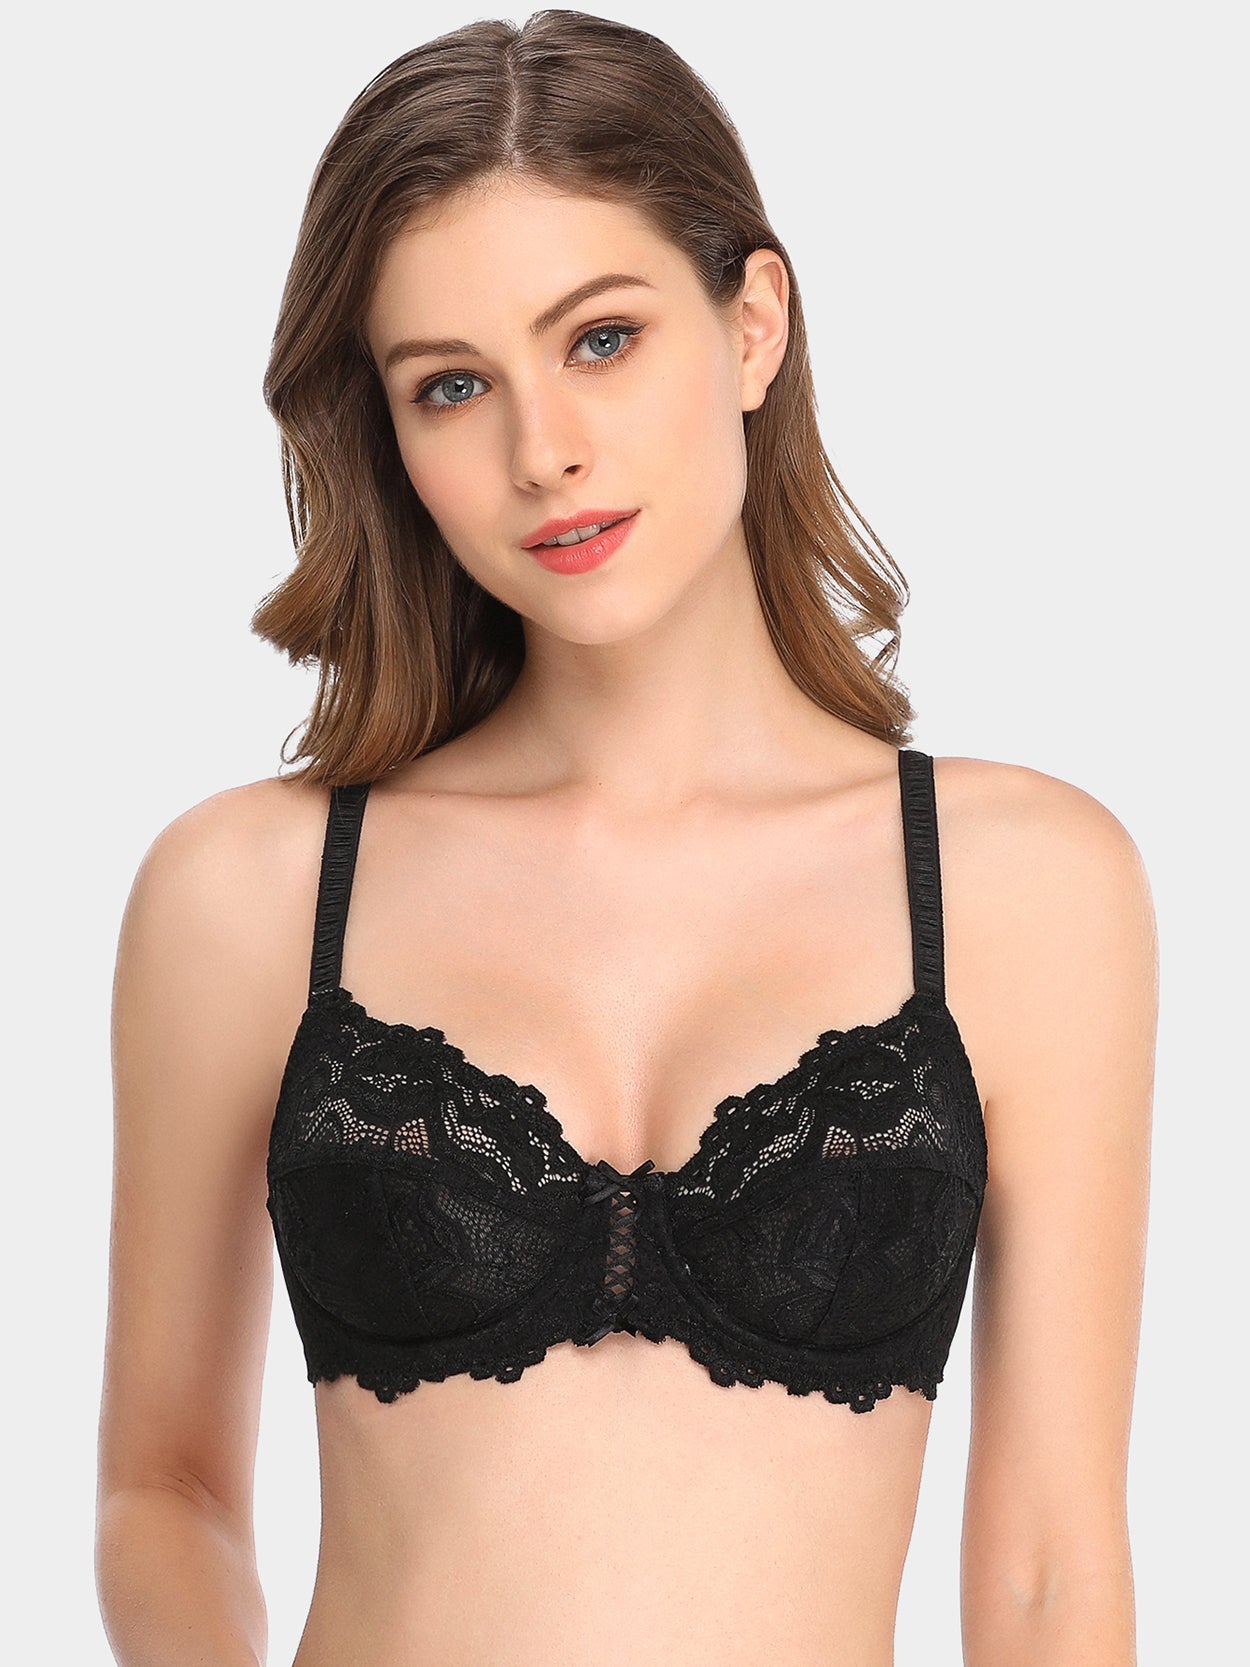 Floral Lace Non-Padded Full Coverage Underwire Bra Black